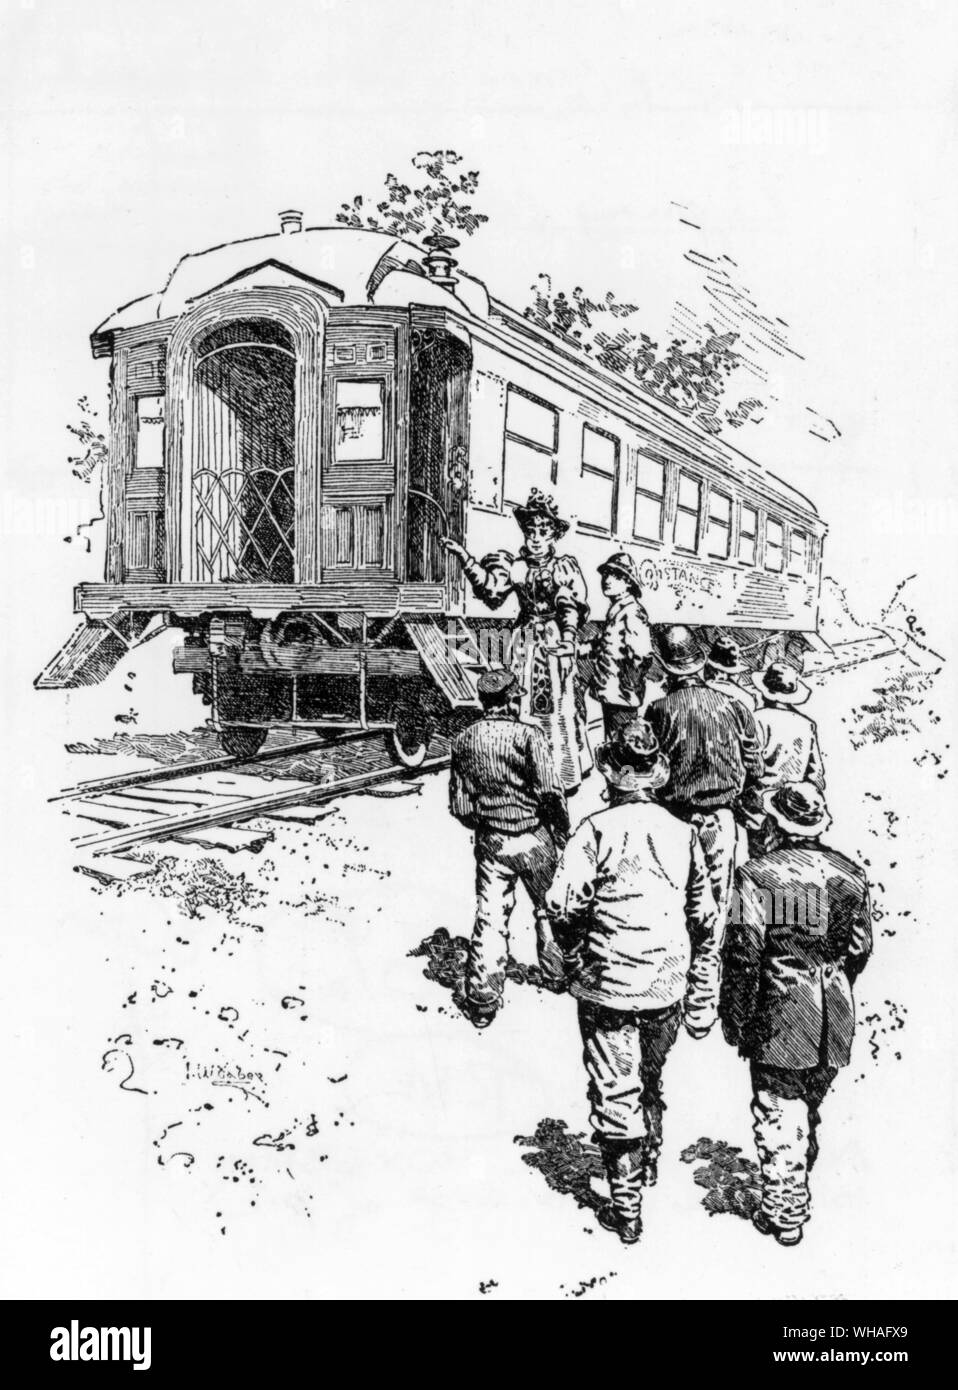 Most English children on reading Captains Courageous are puzzled by reference to the private cars Harvey & Constance owned by Harvey Cheyne's millionaire father. Mrs Cheyne introduces the crew of the 'We're Here' to the 'Constance' Stock Photo